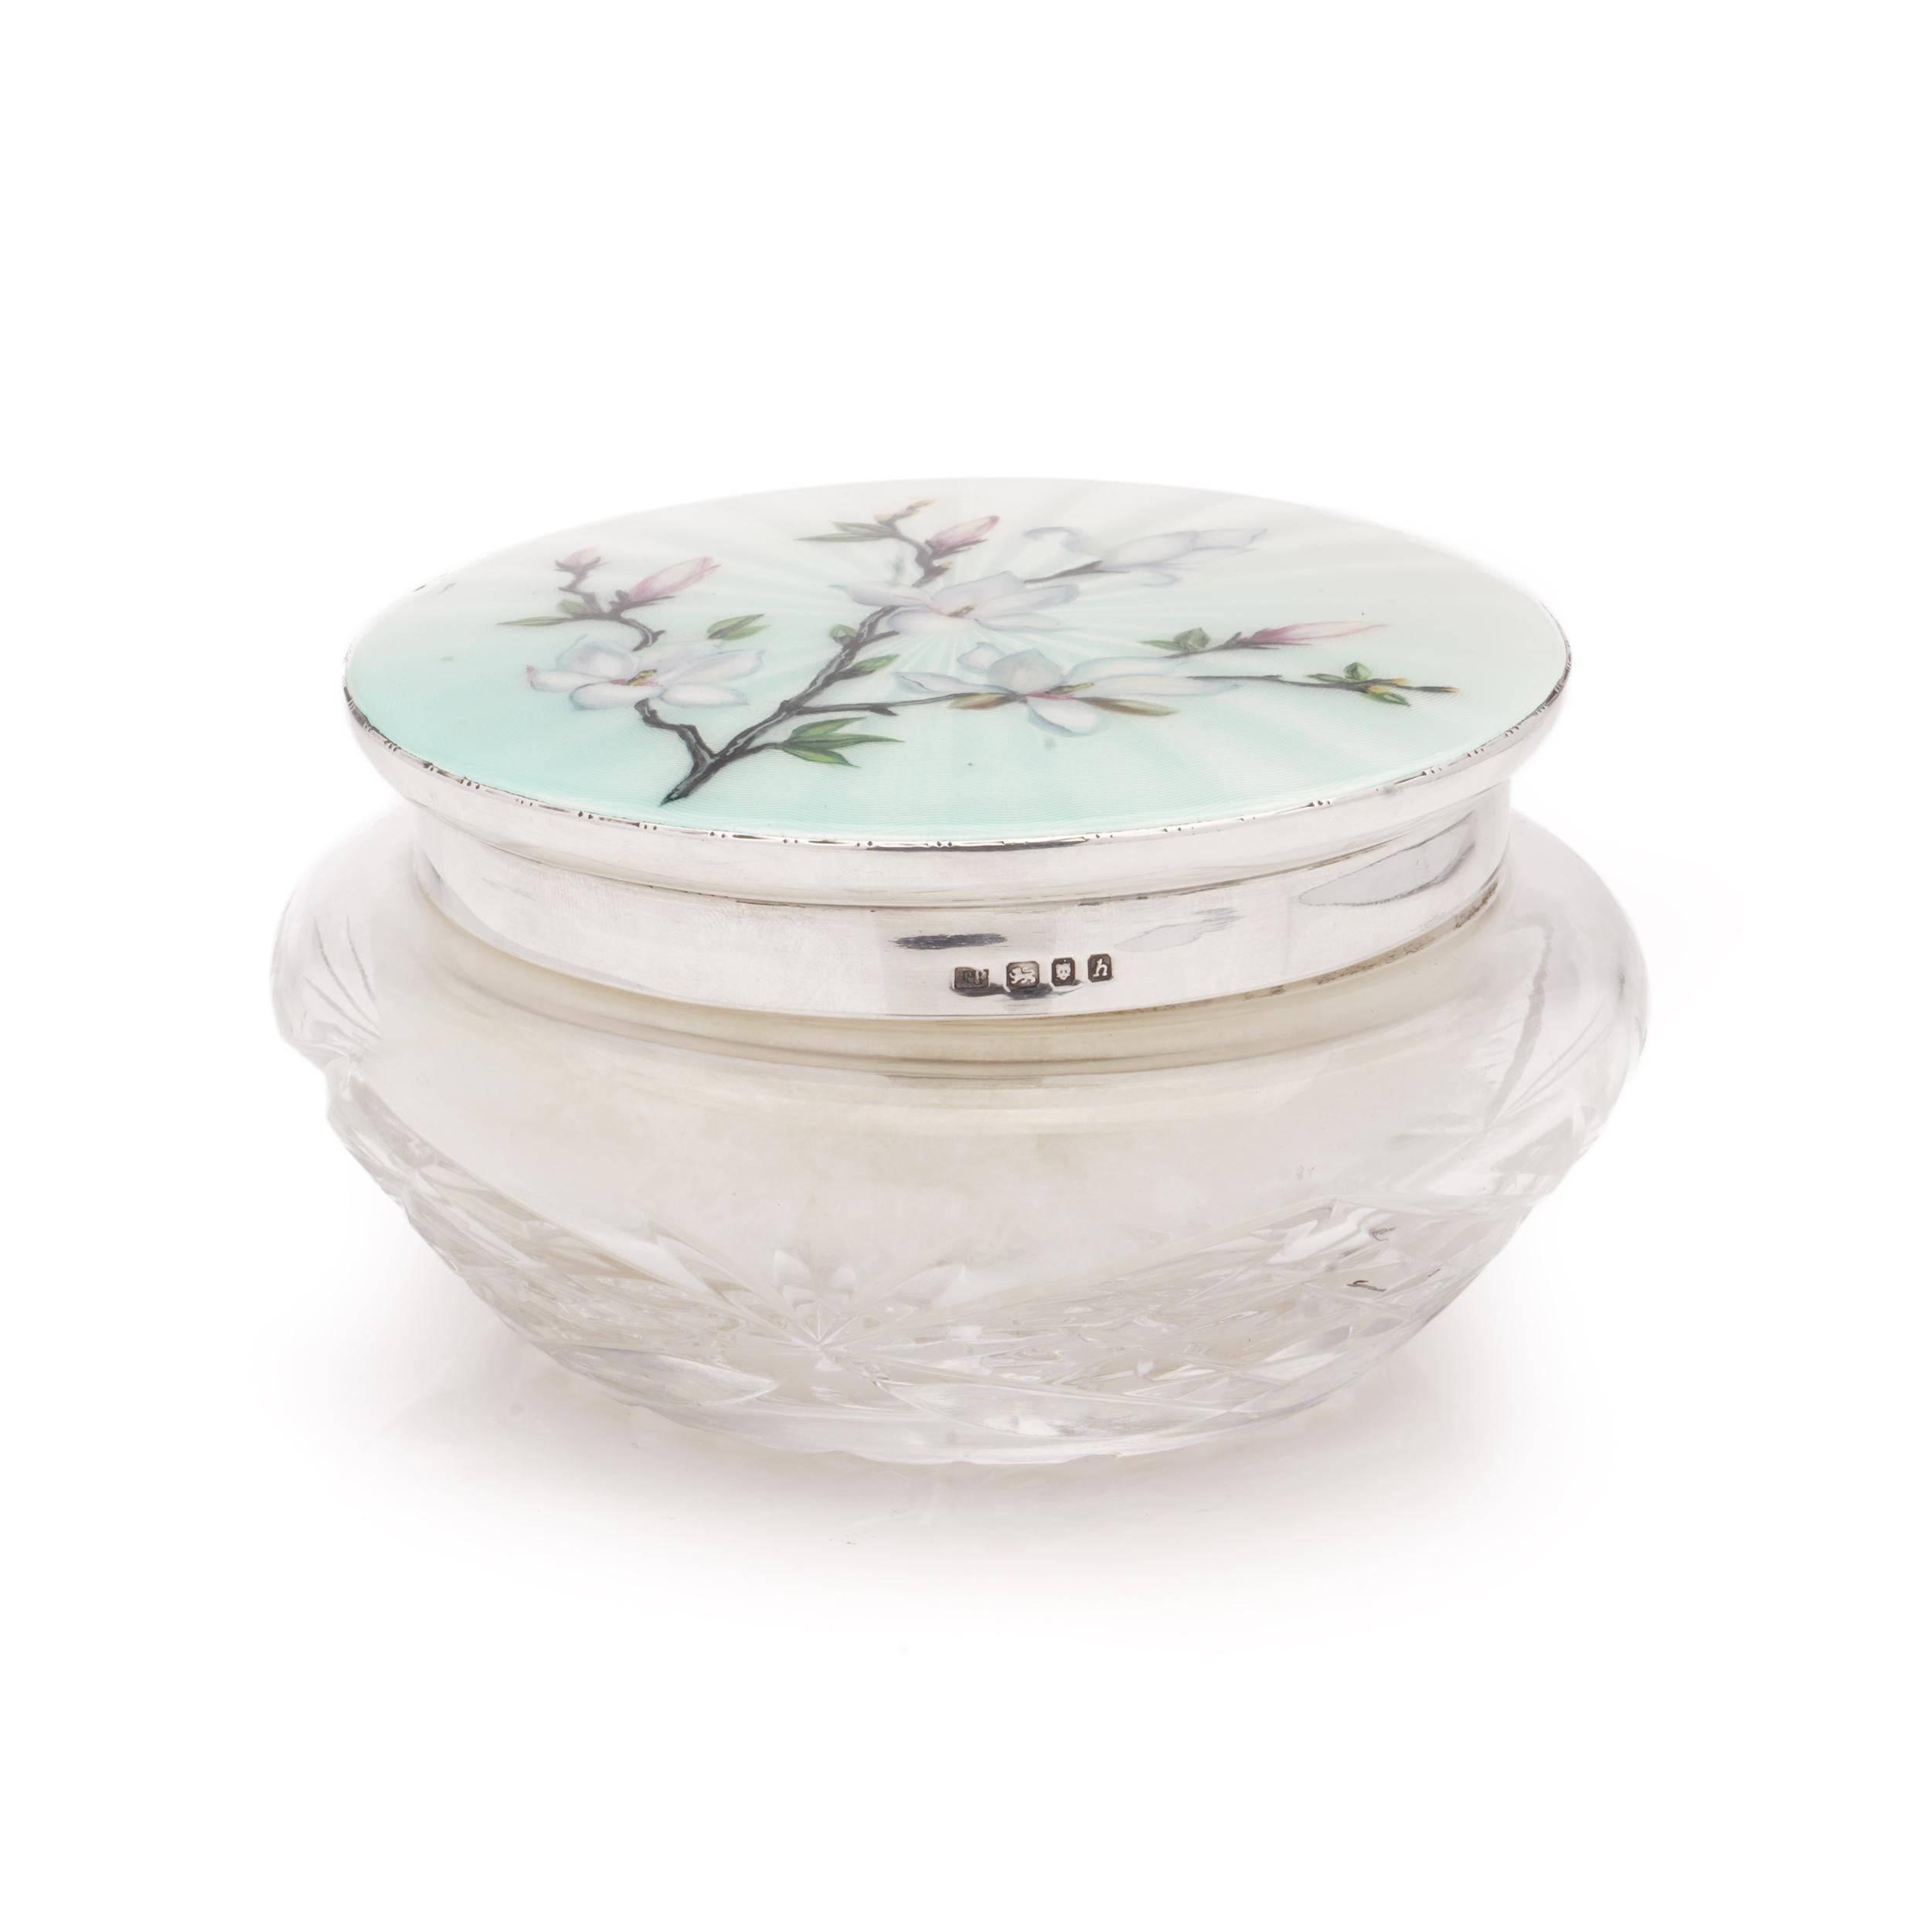 British 925 Sterling Silver Guilloche Enamel and Cut Glass Compact Powder Jar, 1963 For Sale